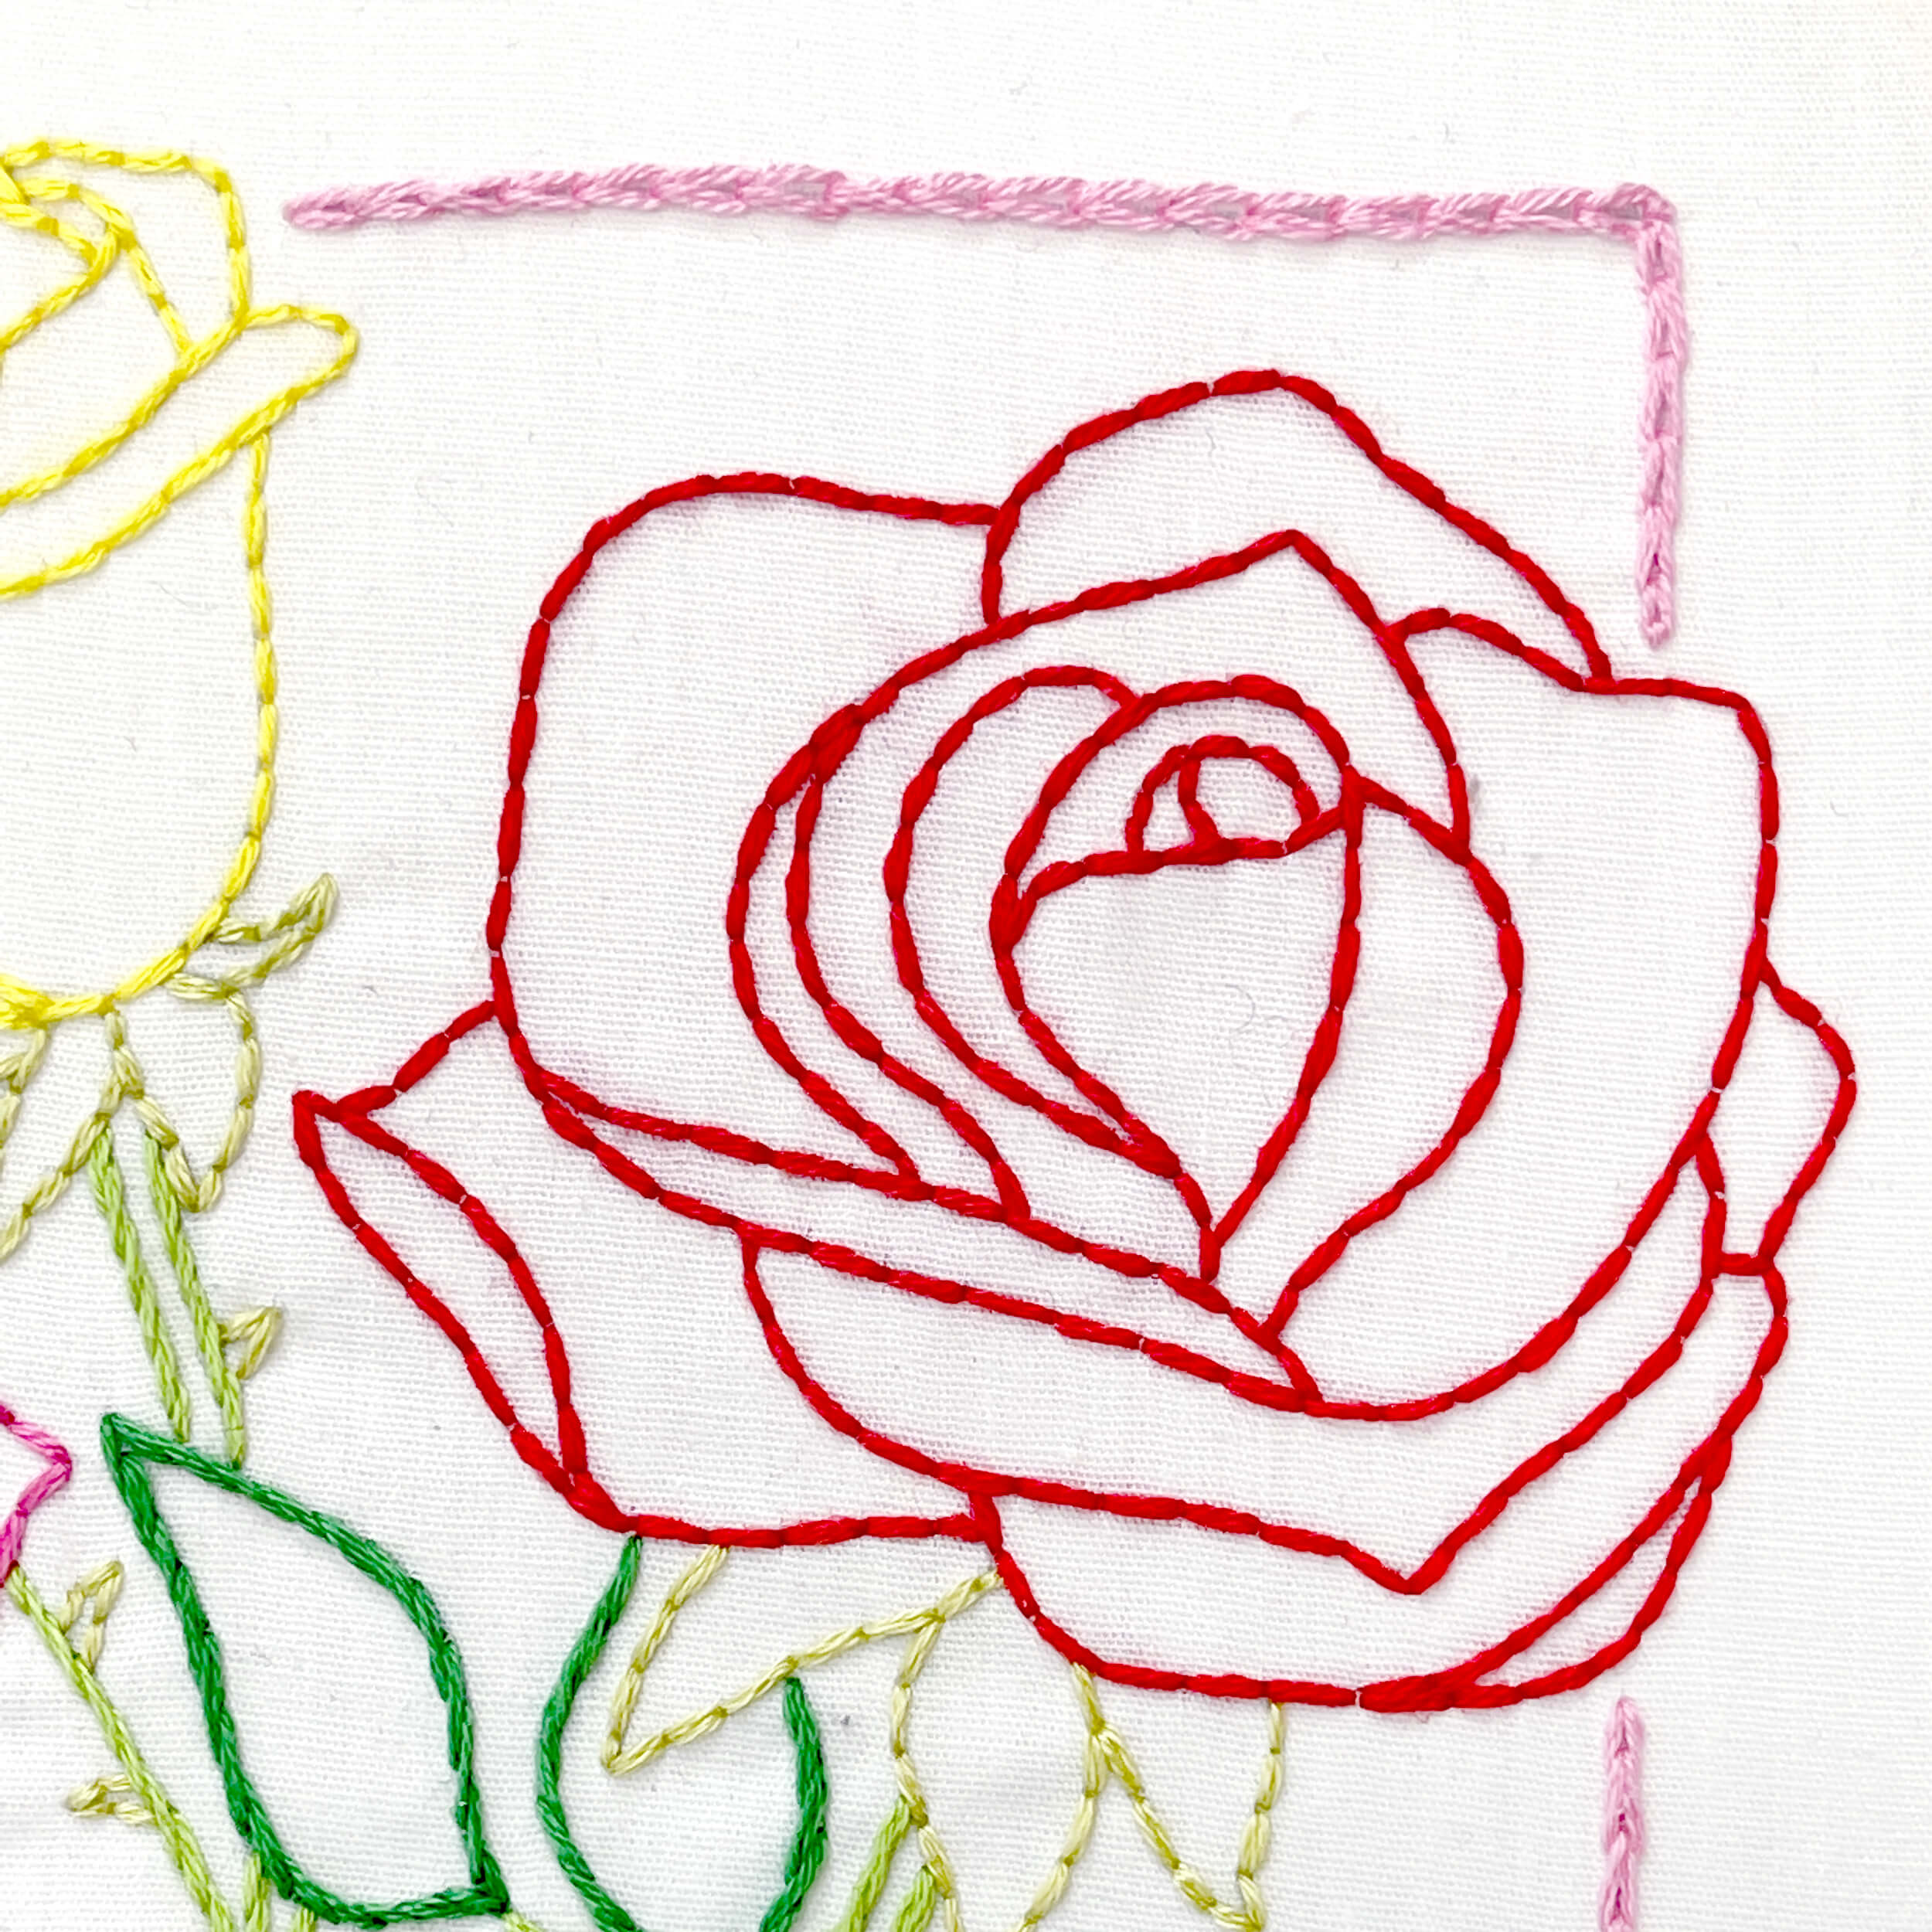 Close up of rose embroidery, back stitch, chain stitch, red rose